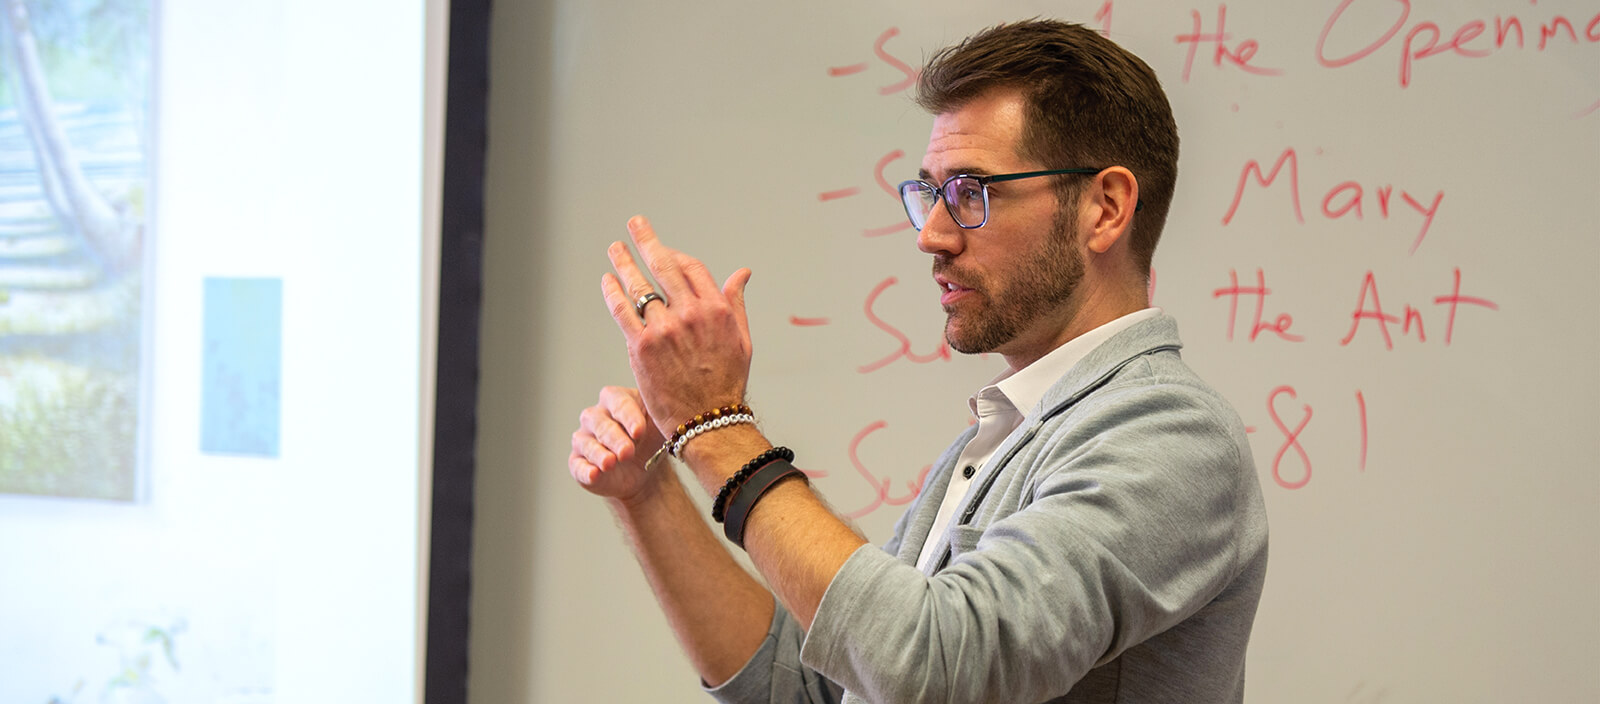 Faculty member Andrew O'Connor teaches a class in theology and religious studies.